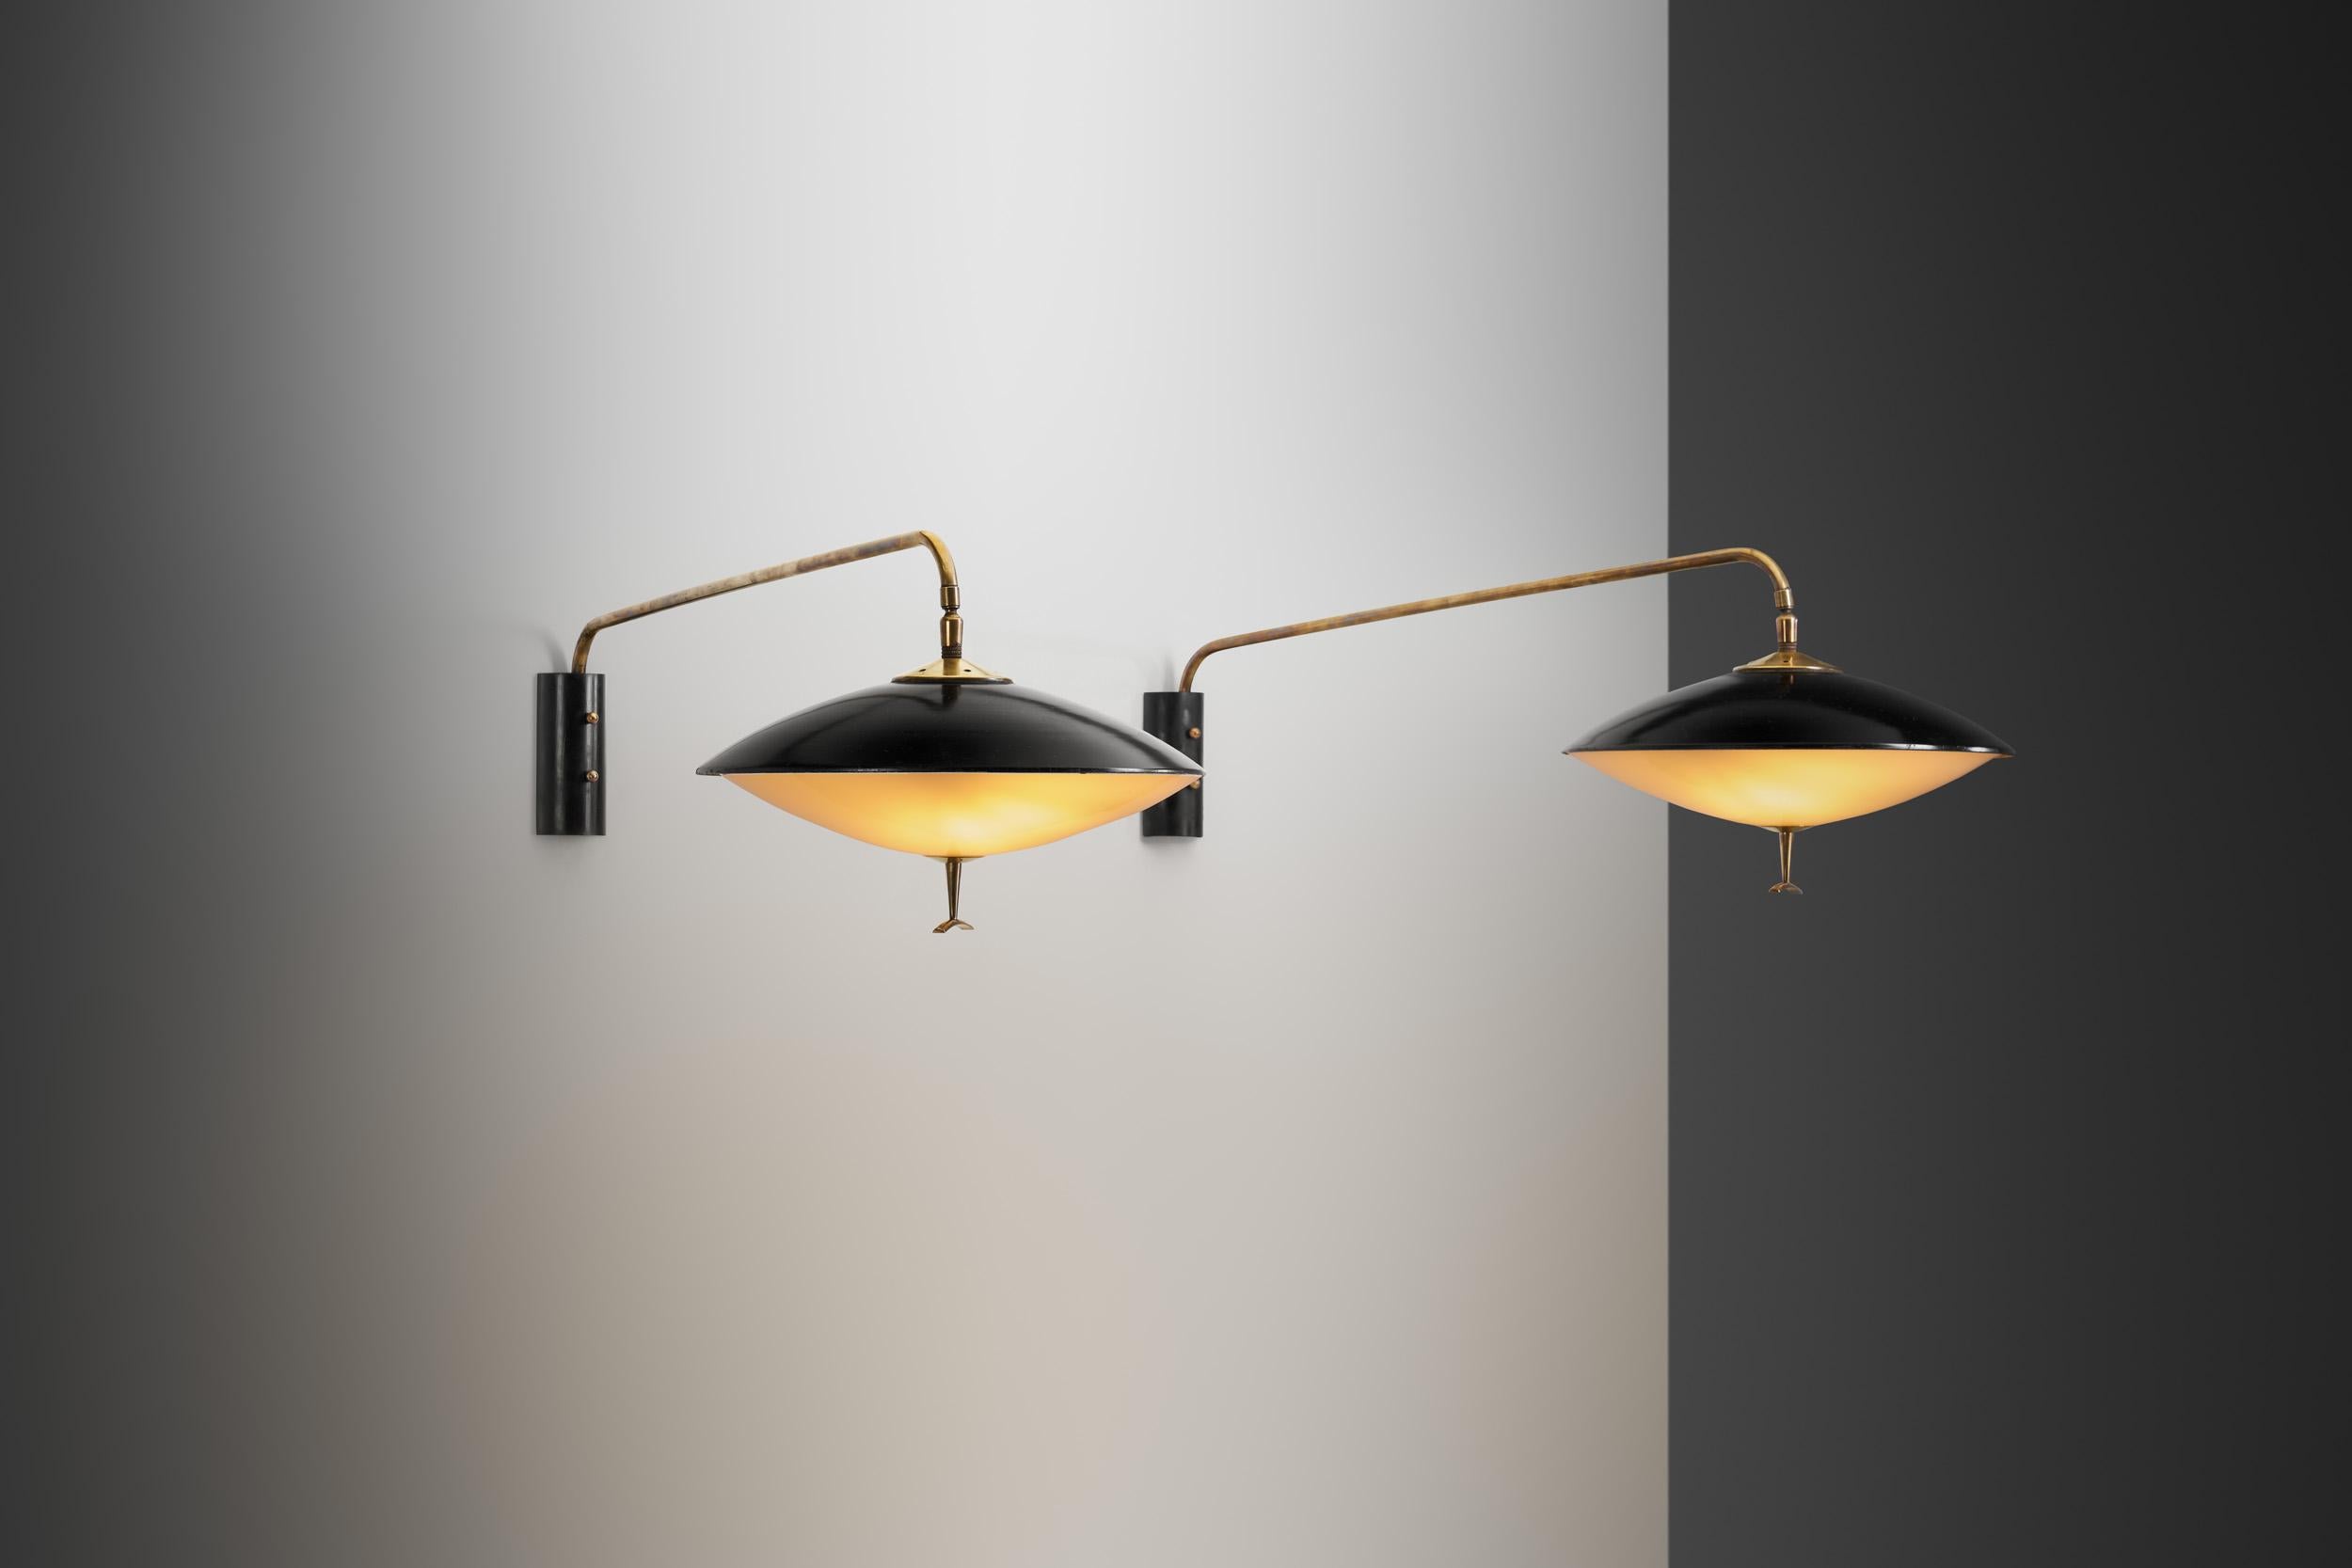 Maison Arlus is a French lighting design company that was founded in the early 20th century by Robert and Jean Arlus. The company quickly gained recognition for its innovative and stylish lighting fixtures, which were characterized by their use of